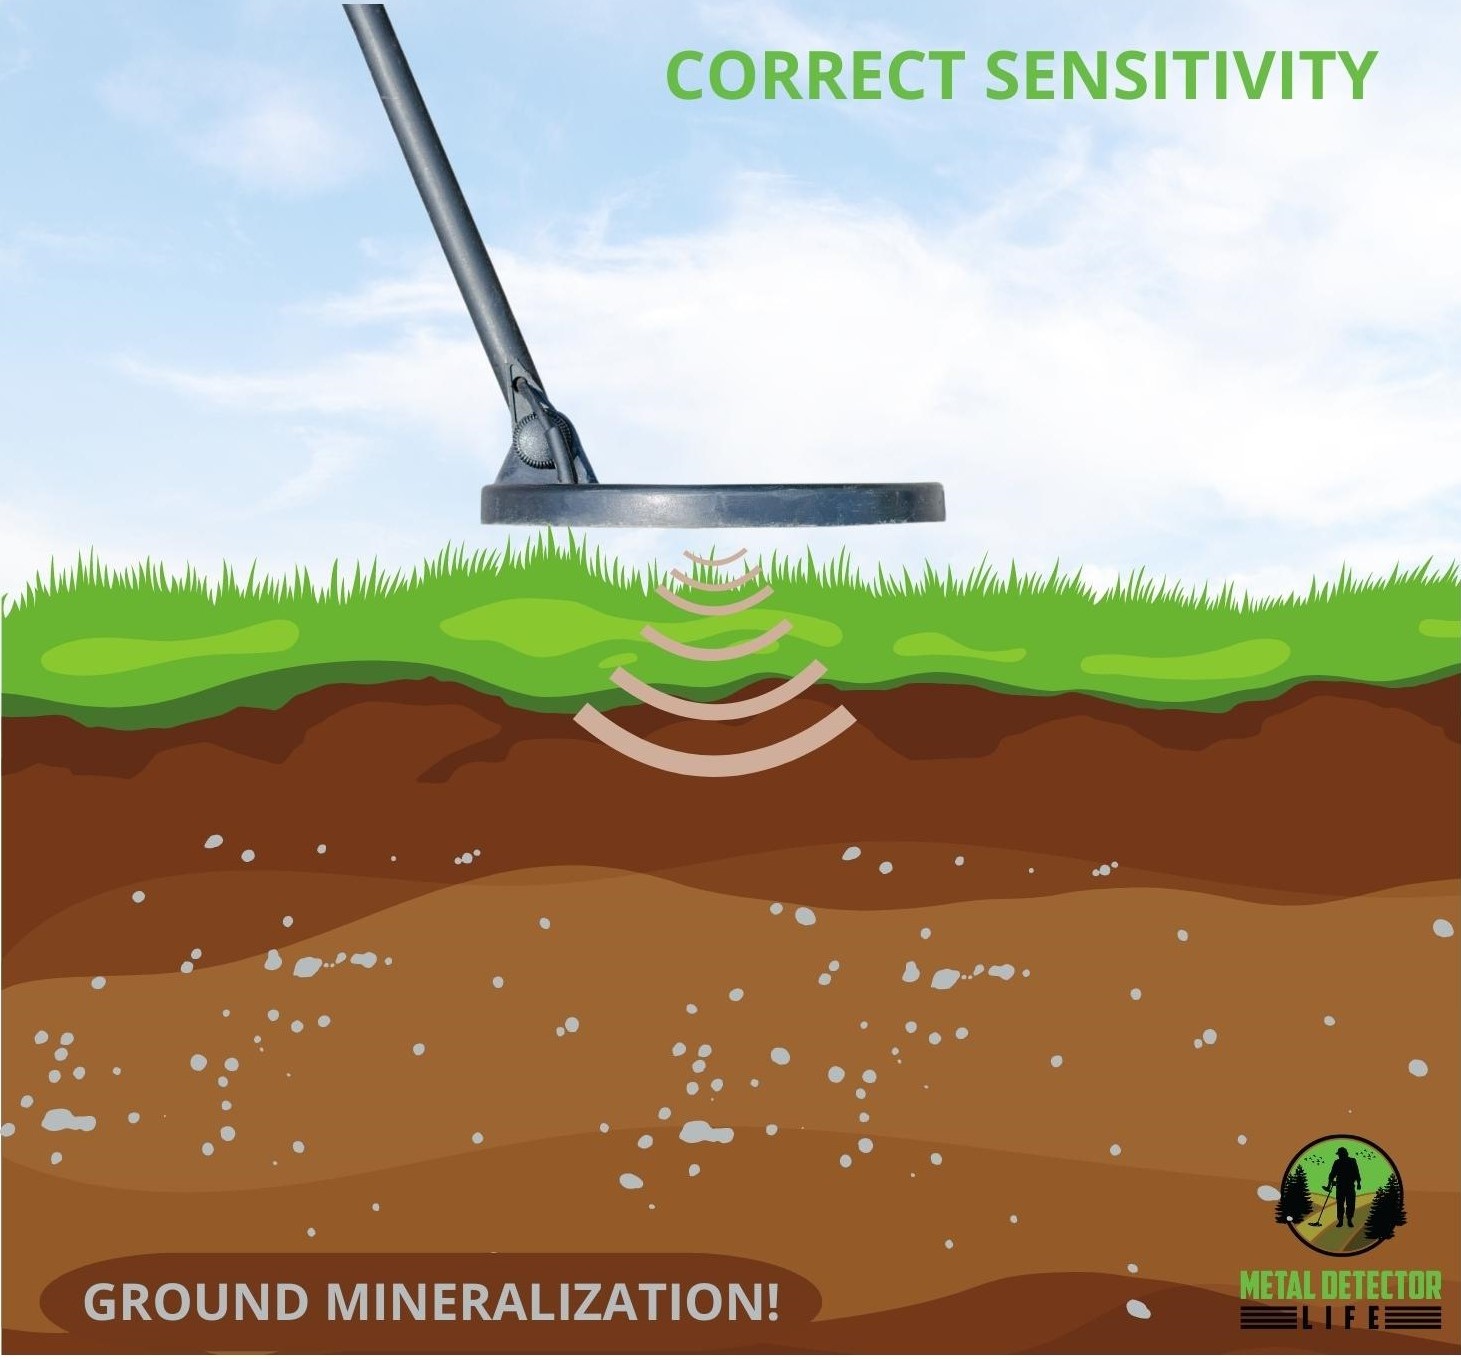 Using a correct sensitivity in bottoms with ground mineralization.